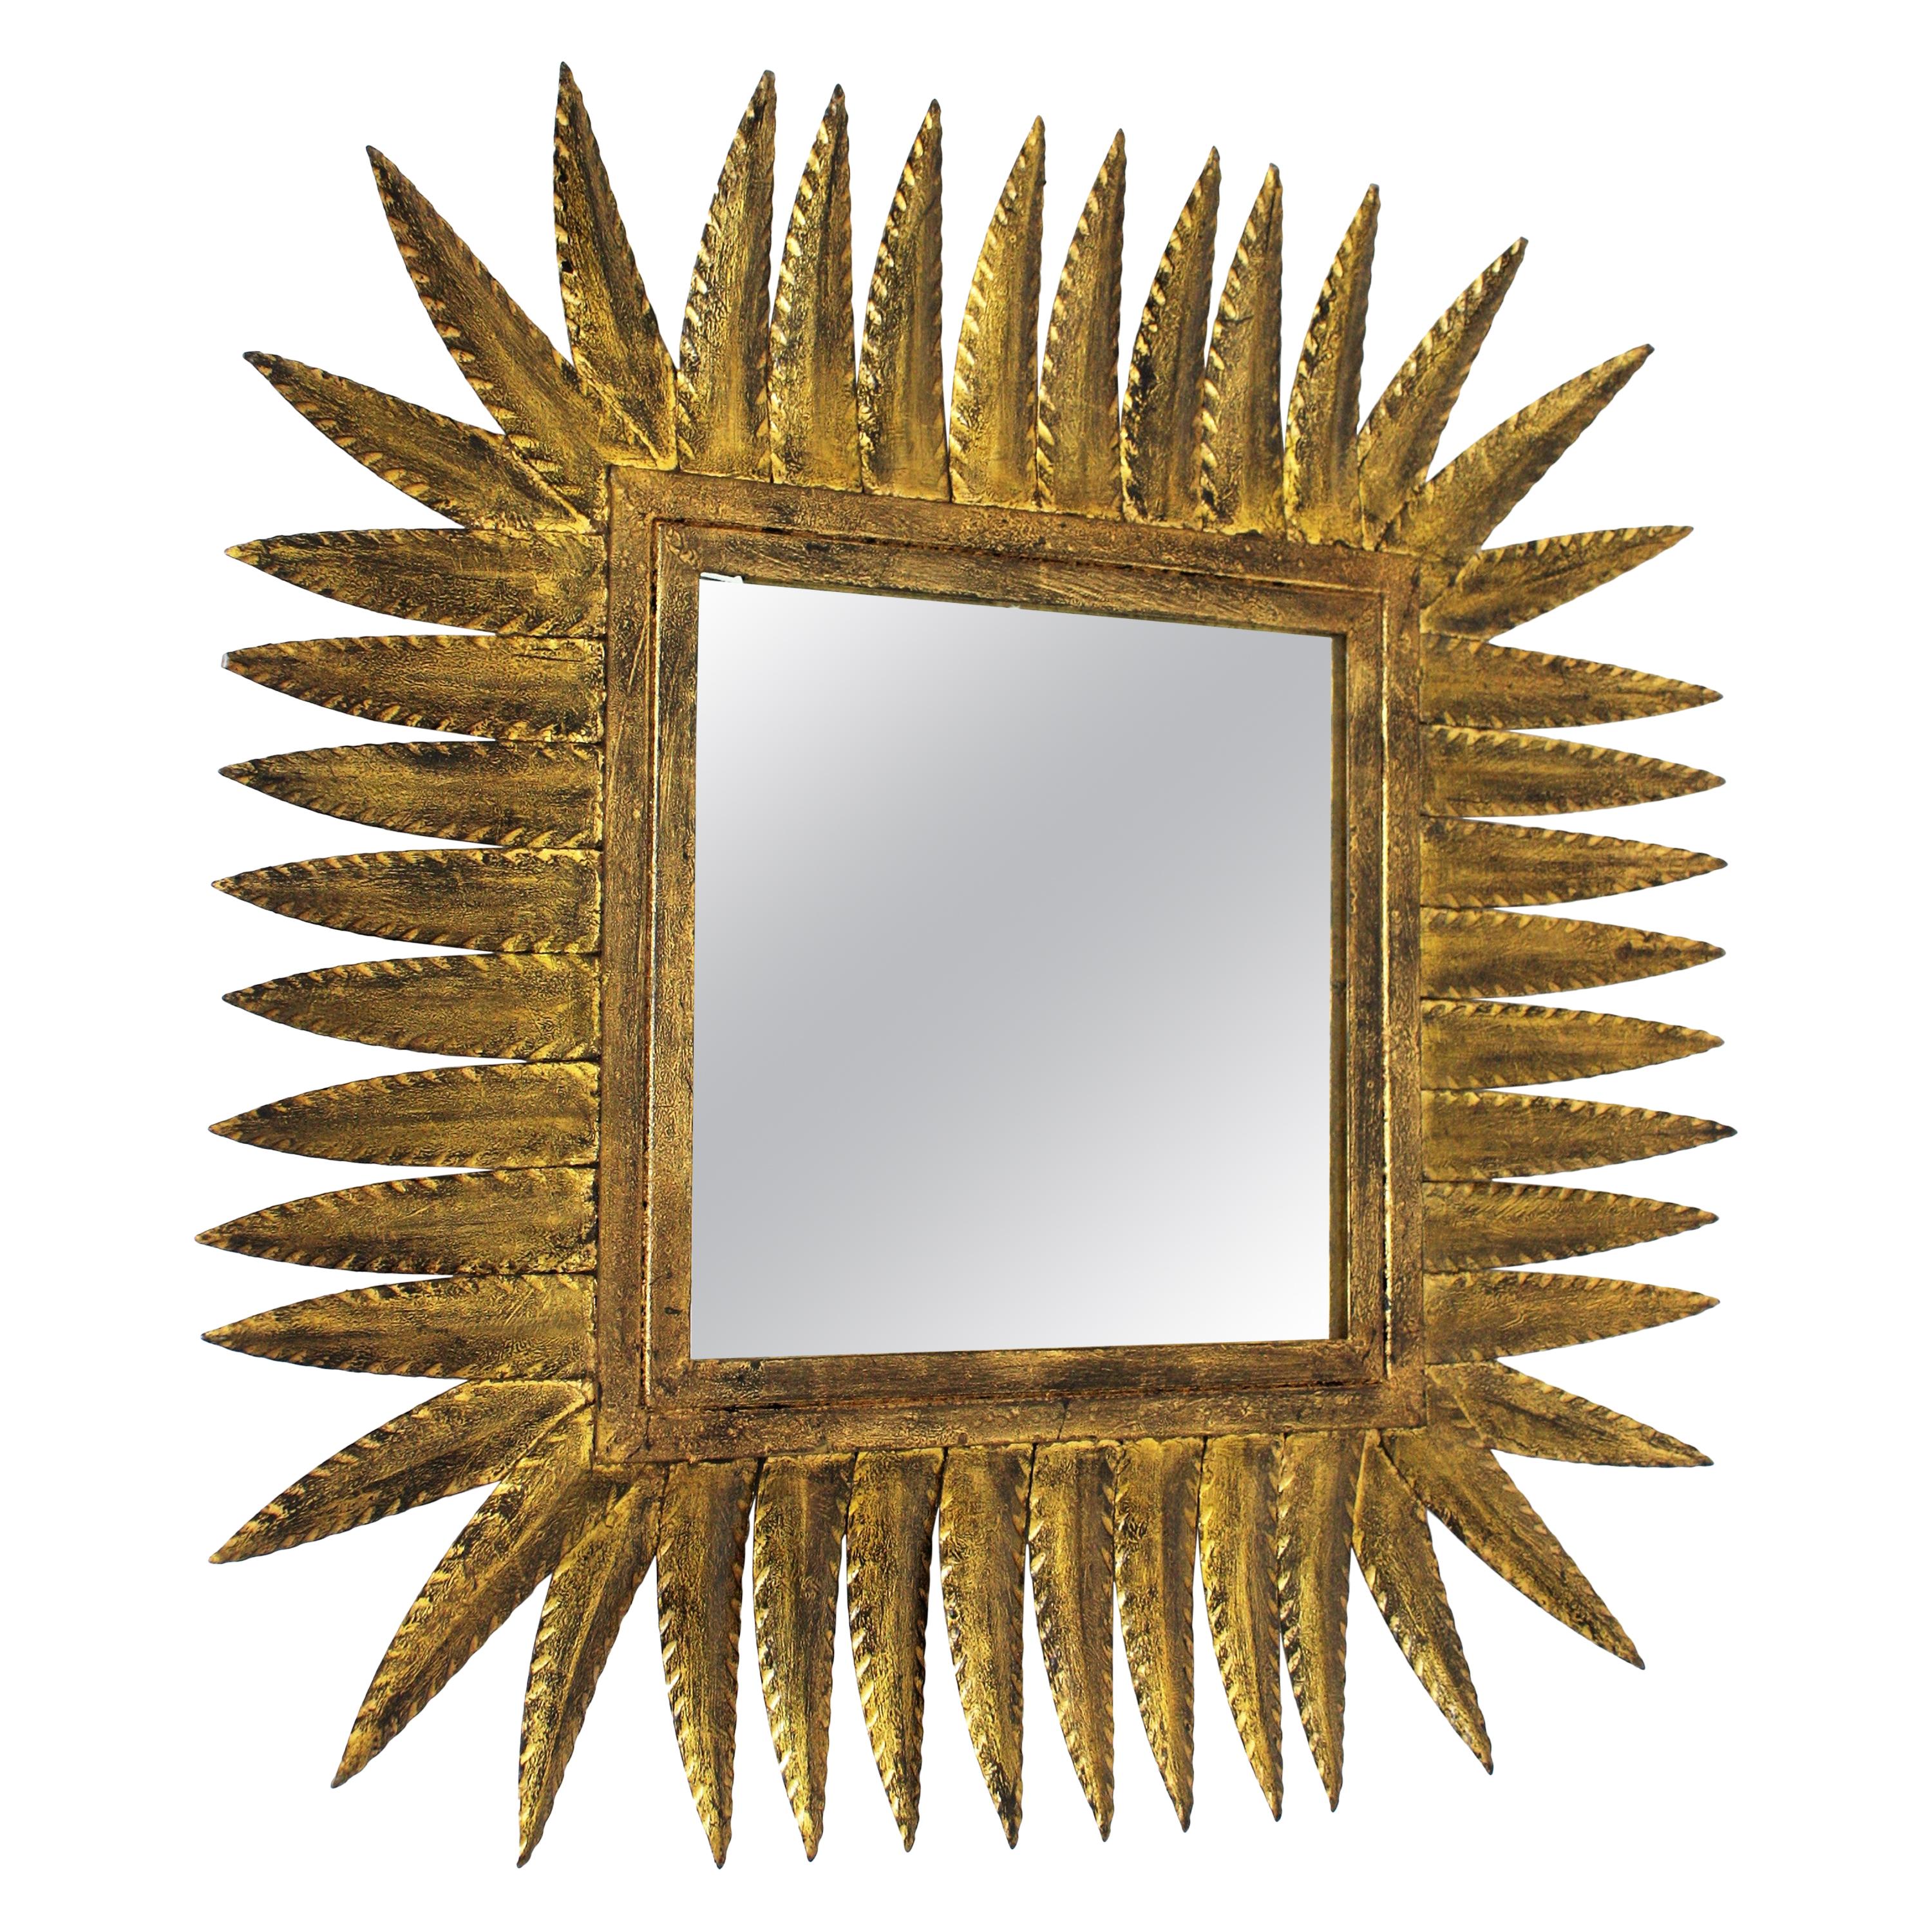 Hand-Hammered Gilt Iron Rhombus shaped sunburst mirror. Spain, 1950s. 
It can be placed in two positions. 
Manufactured by Ferro Art. 
This sunburst mirror will be a nice addition to a powder room or any other room. Place it alone or as a part of a